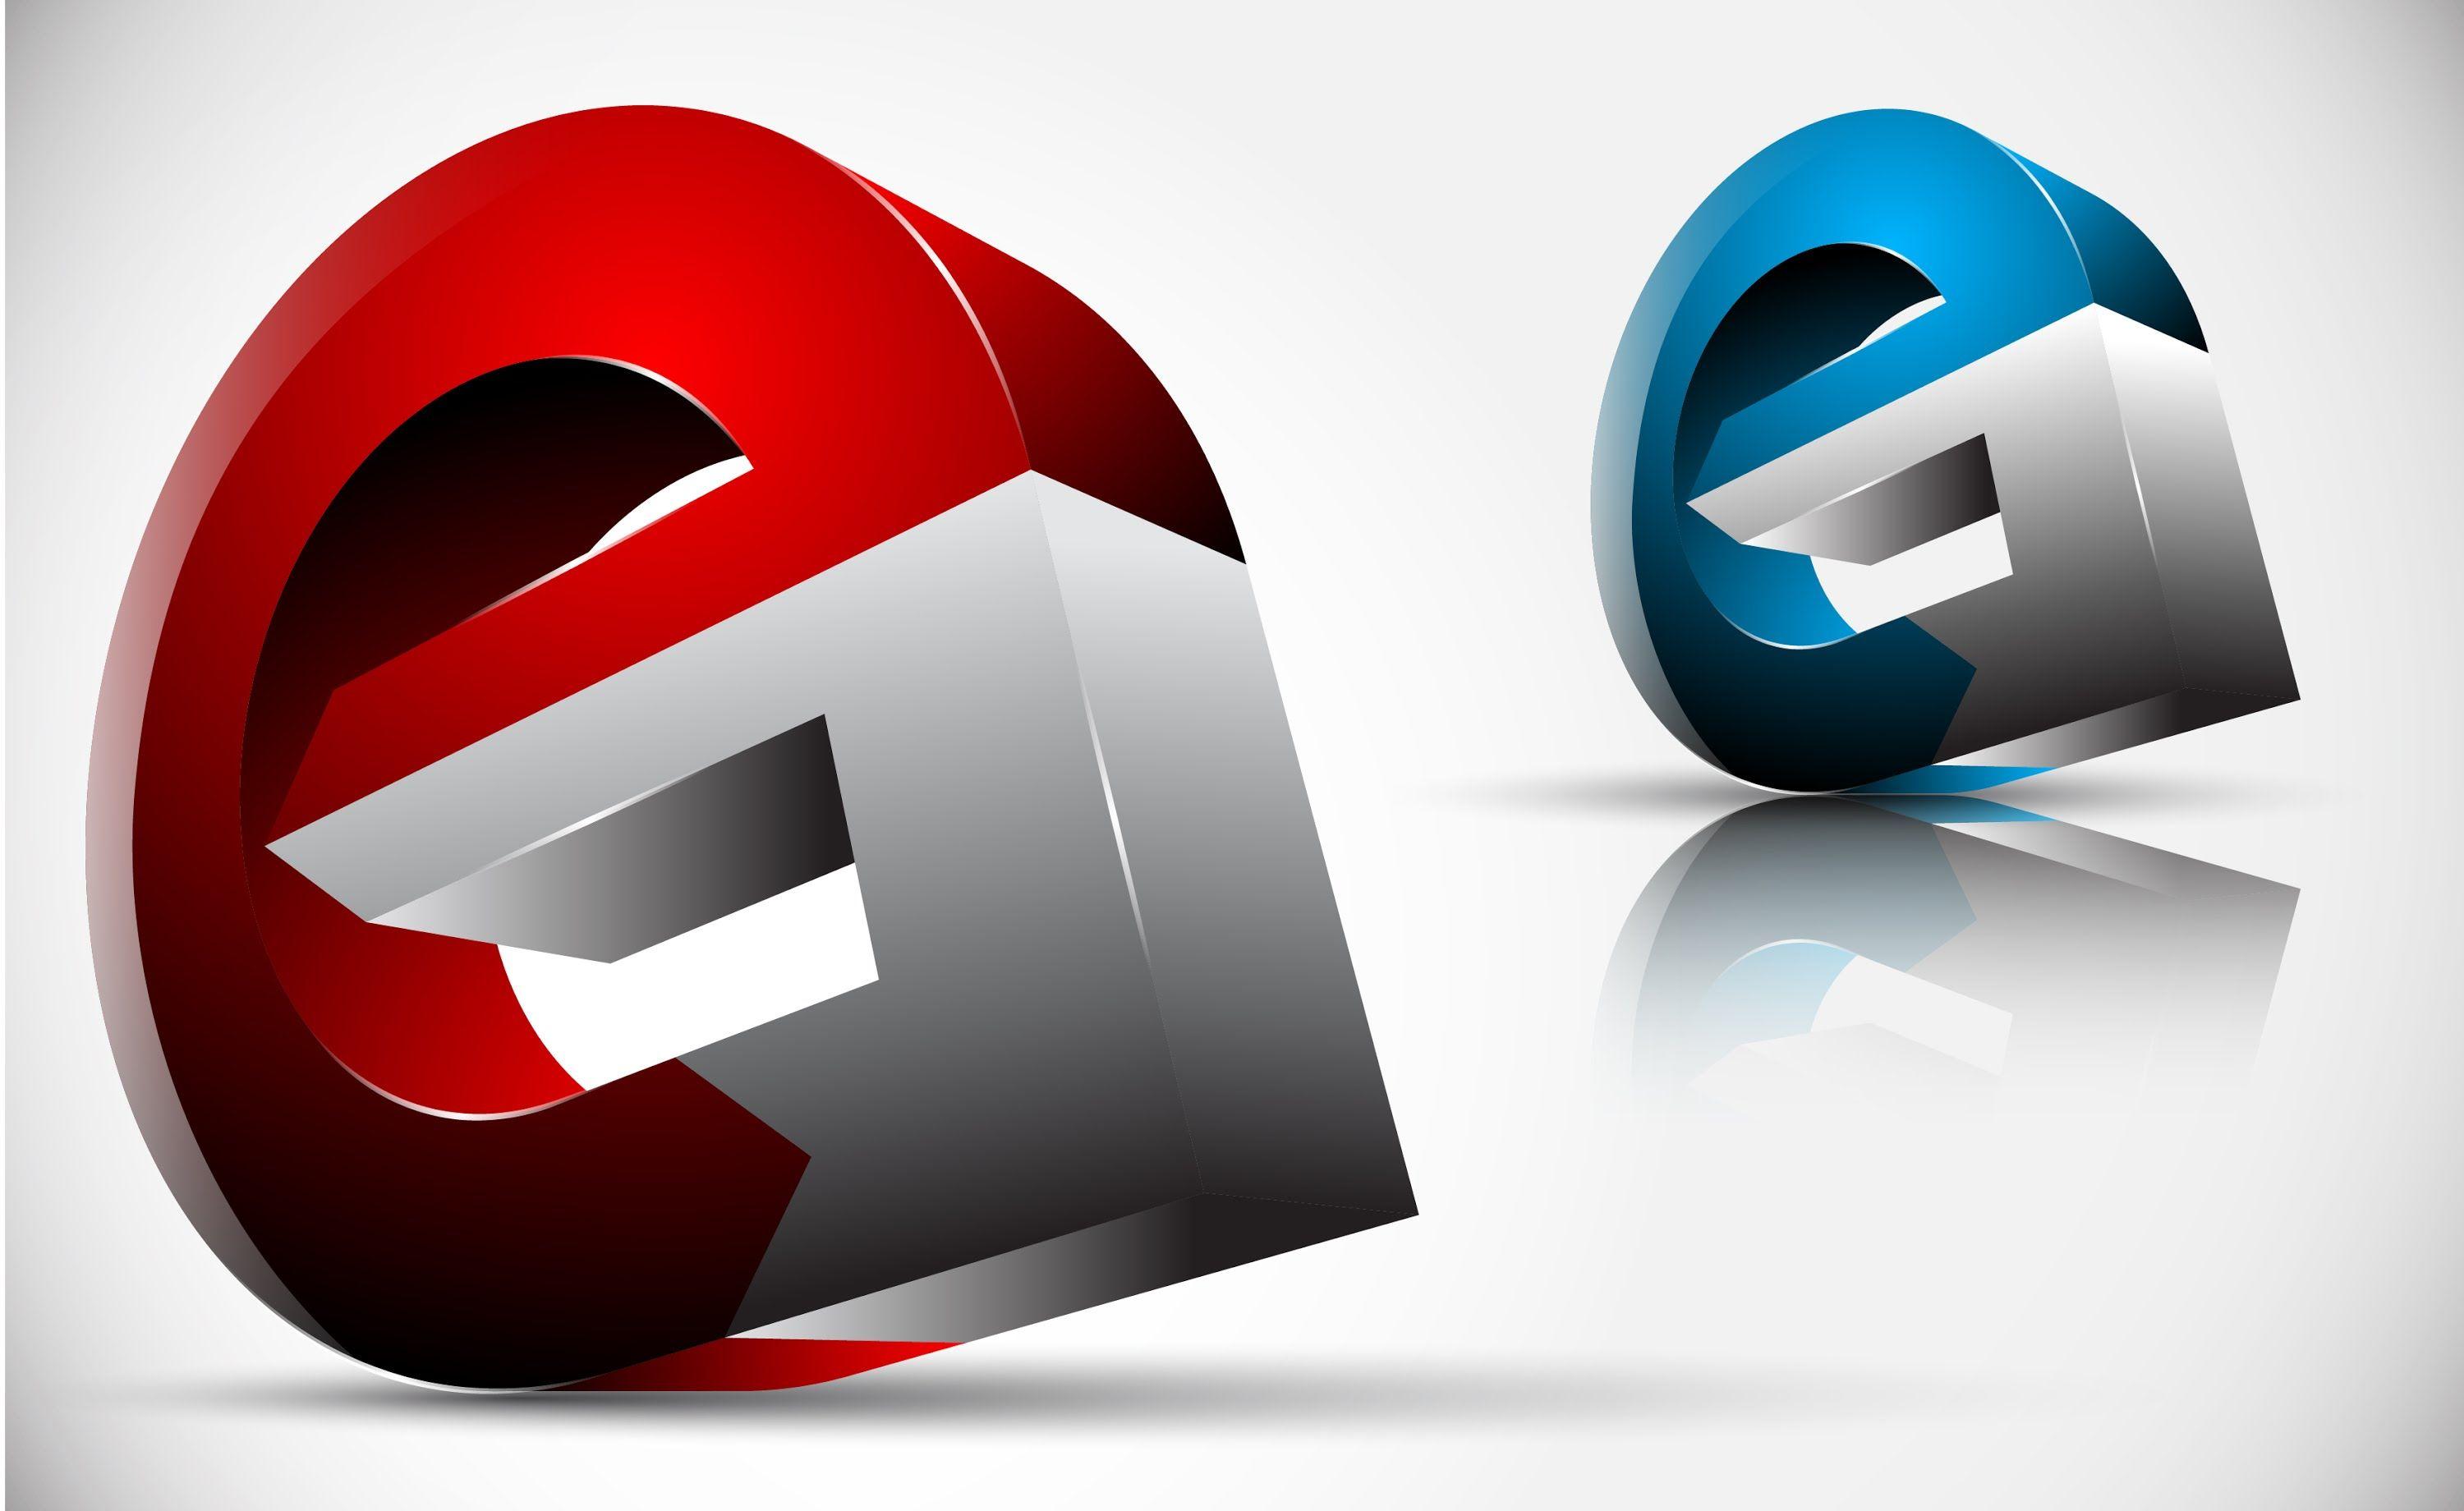 Cool Eg Logo - Design eye catching logo for you within 24hrs by Sumon_1994